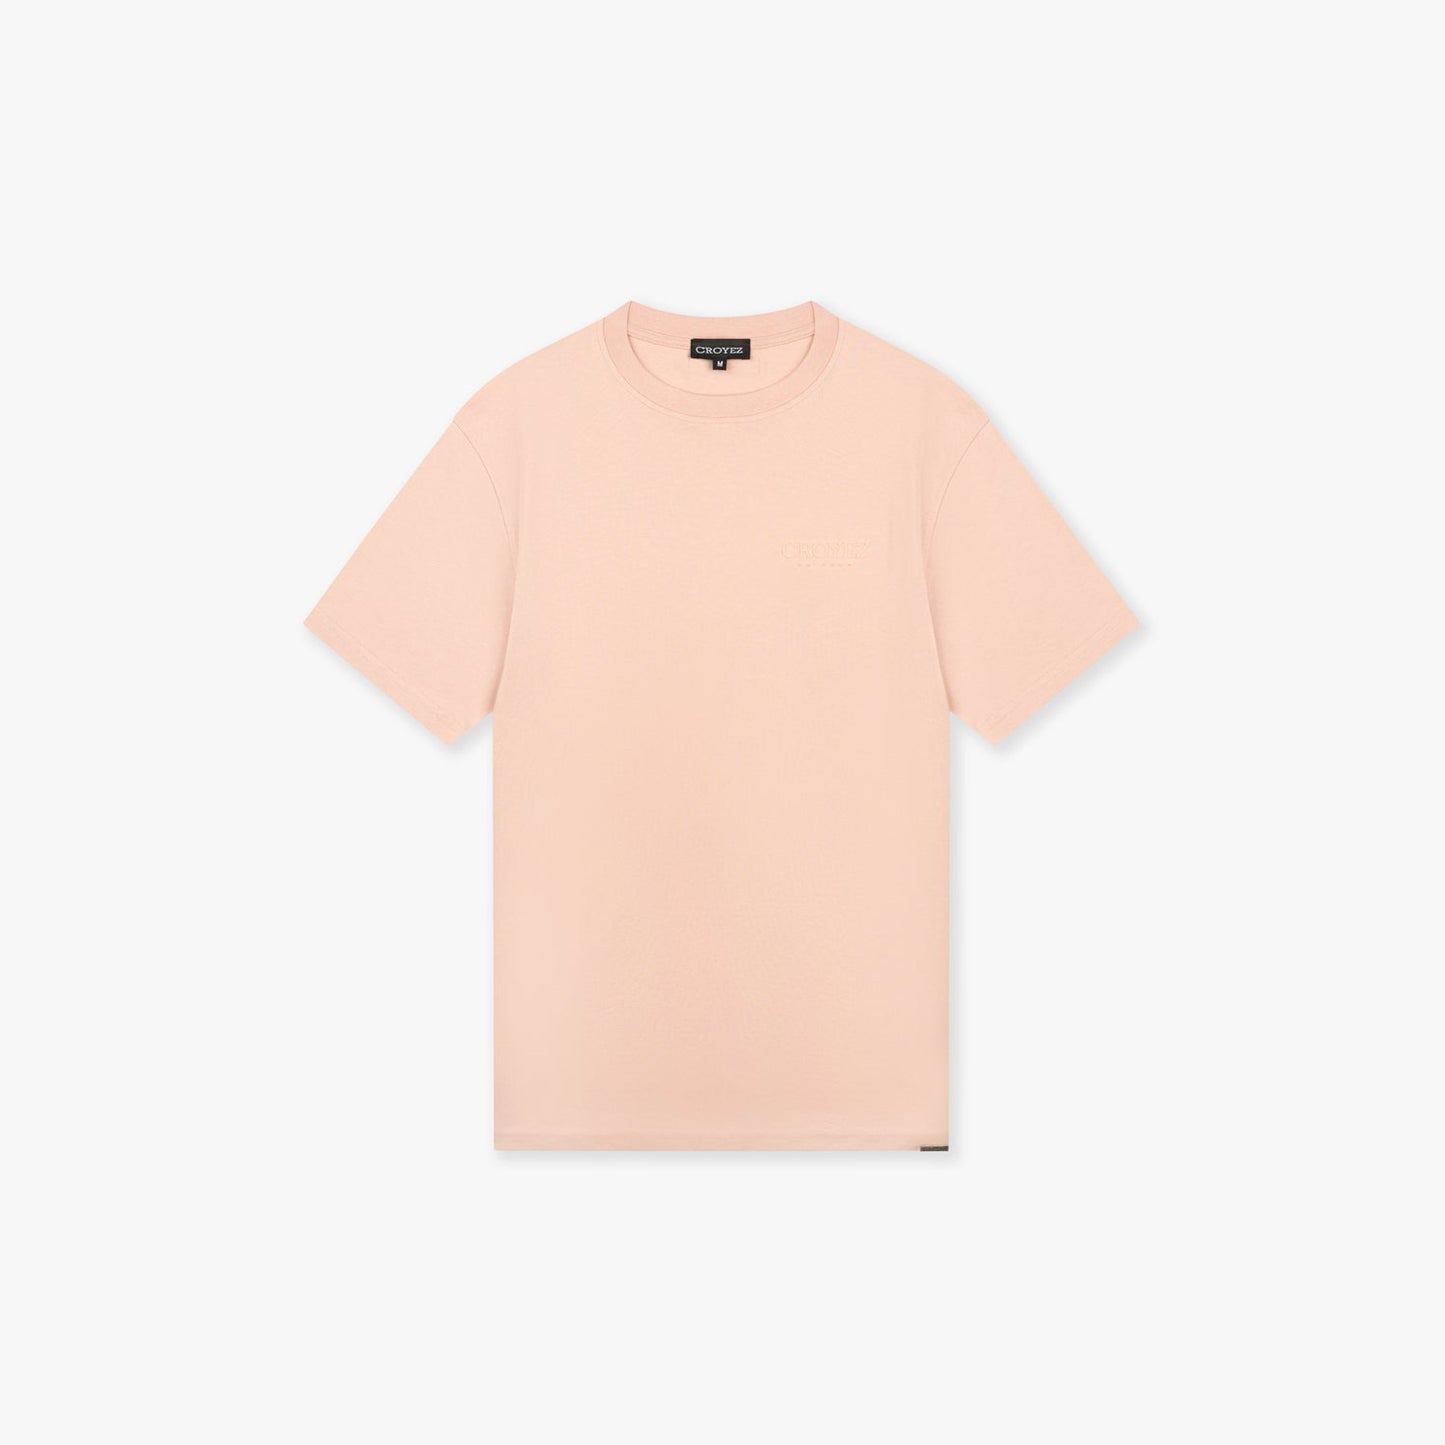 CROYEZ ABSTRACT T-SHIRT - PINK